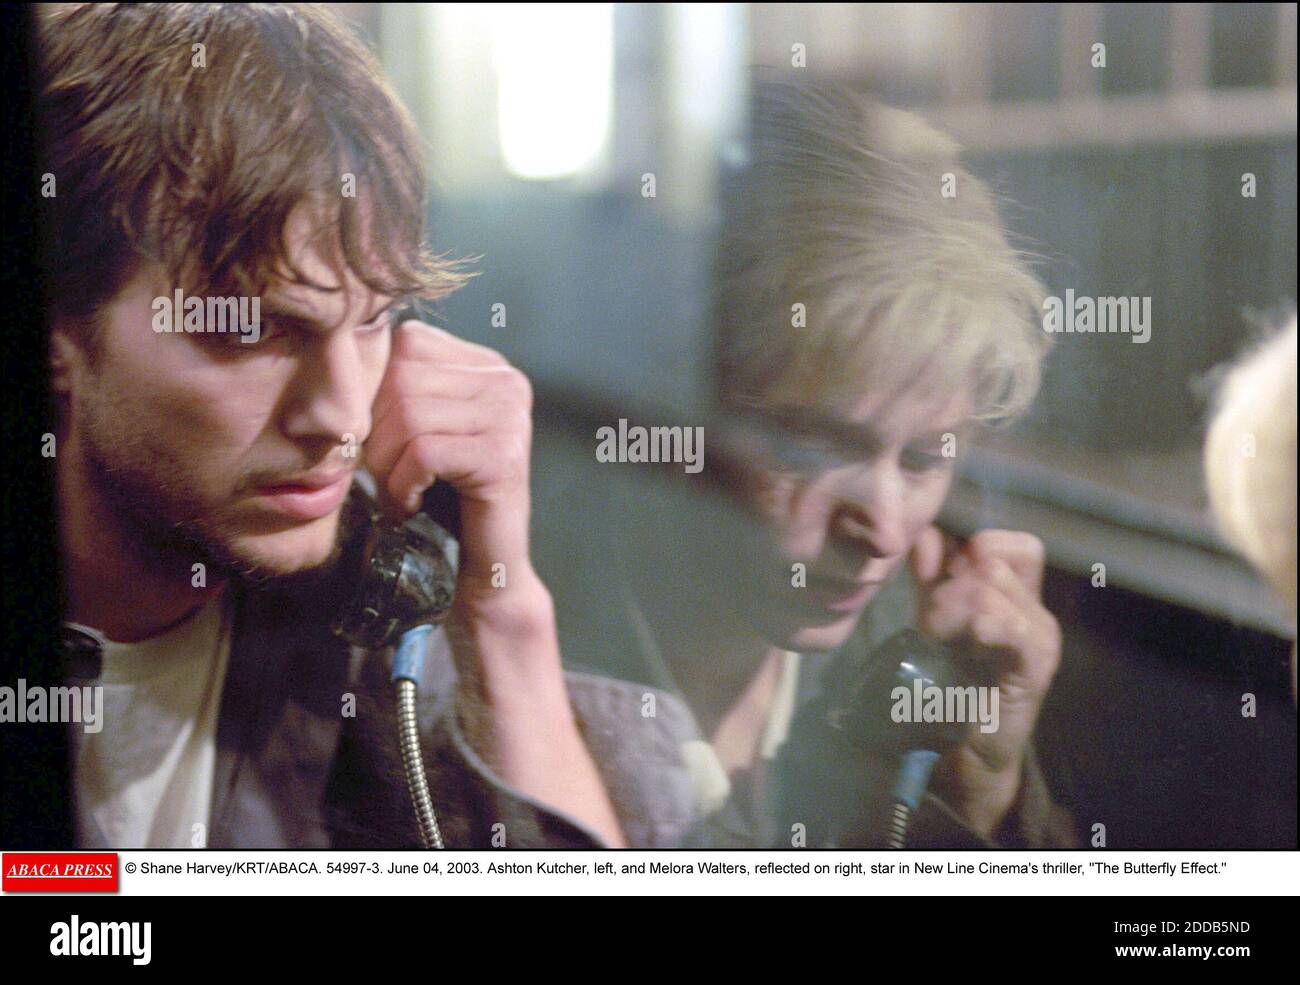 NO FILM, NO VIDEO, NO TV, NO DOCUMENTARY - © Shane Harvey/KRT/ABACA. 54997-3. June 04, 2003. Ashton Kutcher, left, and Melora Walters, reflected on right, star in New Line Cinema's thriller, The Butterfly Effect. Stock Photo